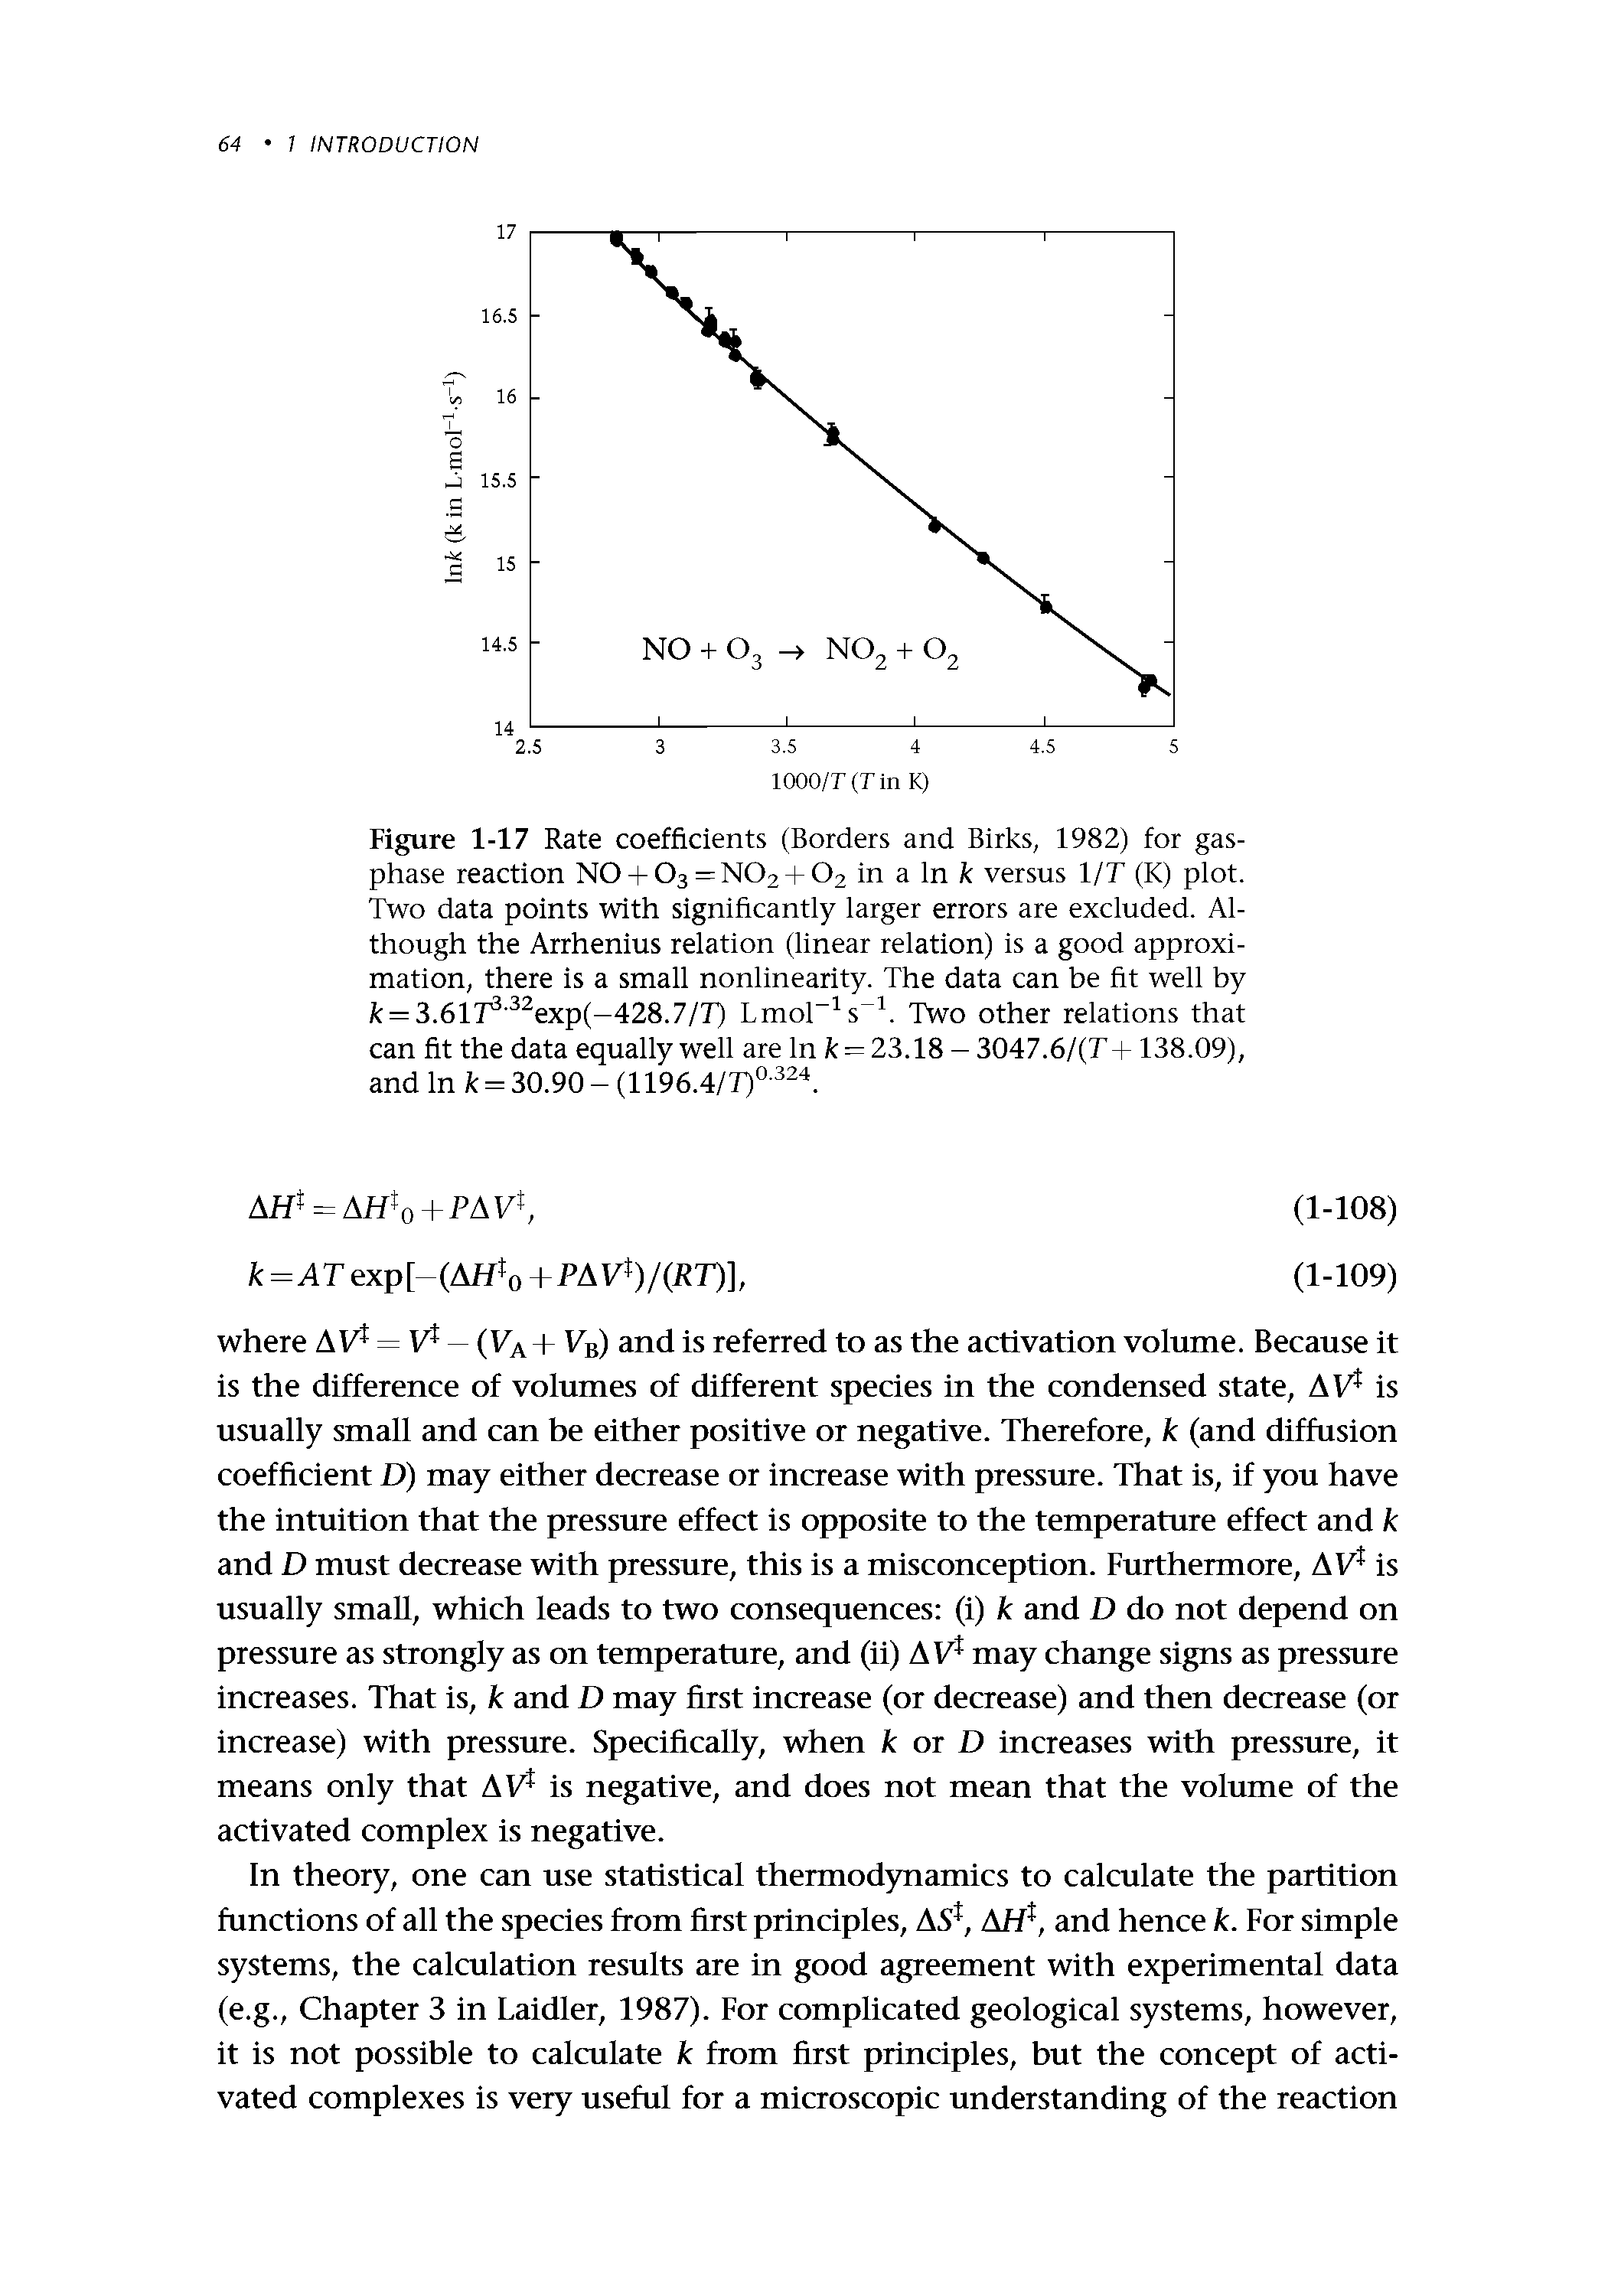 Figure 1-17 Rate coefficients (Borders and Birks, 1982) for gas-phase reaction N0 + 03=N02 + 02 in a In versus l/T (K) plot. Two data points with significantly larger errors are excluded. Although the Arrhenius relation (linear relation) is a good approximation, there is a small nonlinearity. The data can be fit well by k = 3.617 exp(-428.7/T) LmoP s Two other relations that can fit the data equally well are In k = 23.18 - 3047.6/(T +138.09), and In k = 30.90 - (1196.4/ T)° 24...